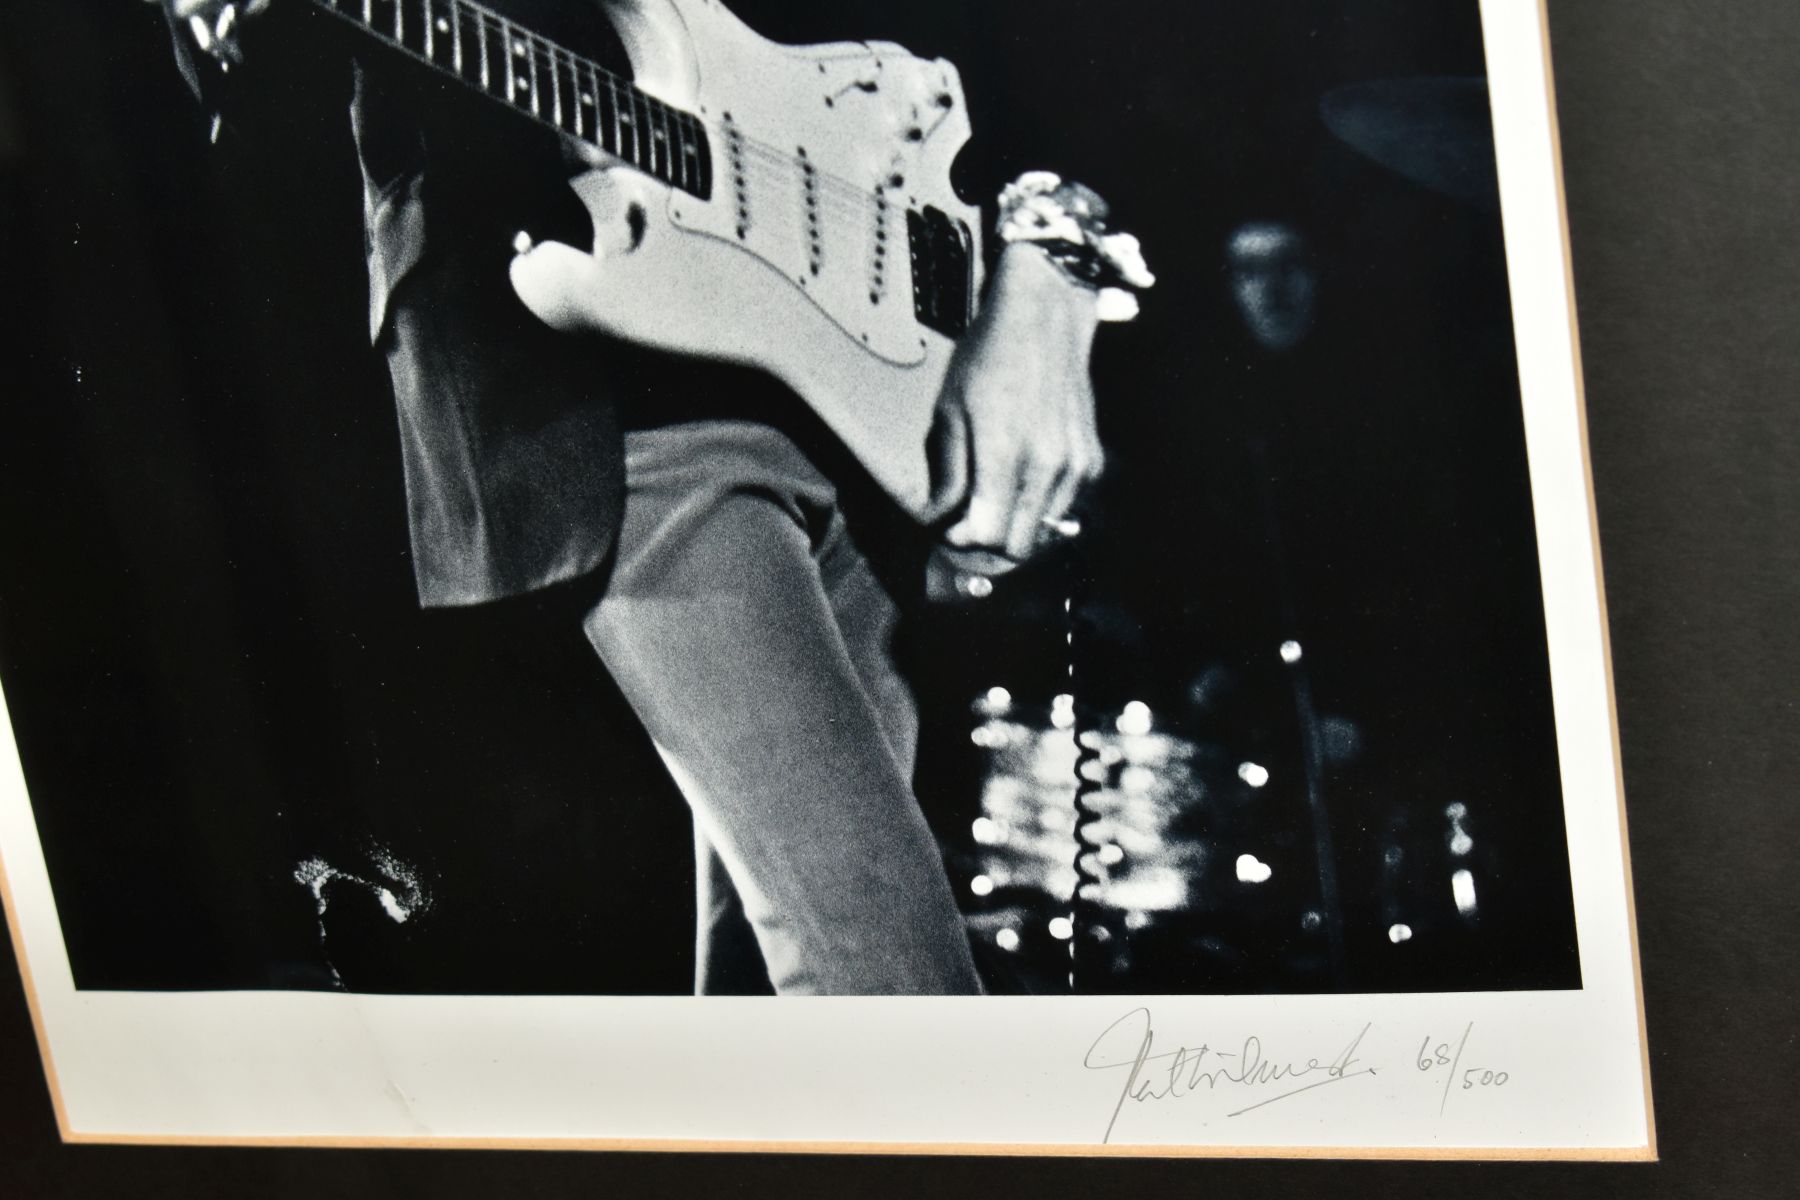 JIMI HENDRIX, three Jimi Hendrix images, a Val Wilmer photo-lithograph limited edition 68/500 of - Image 3 of 5